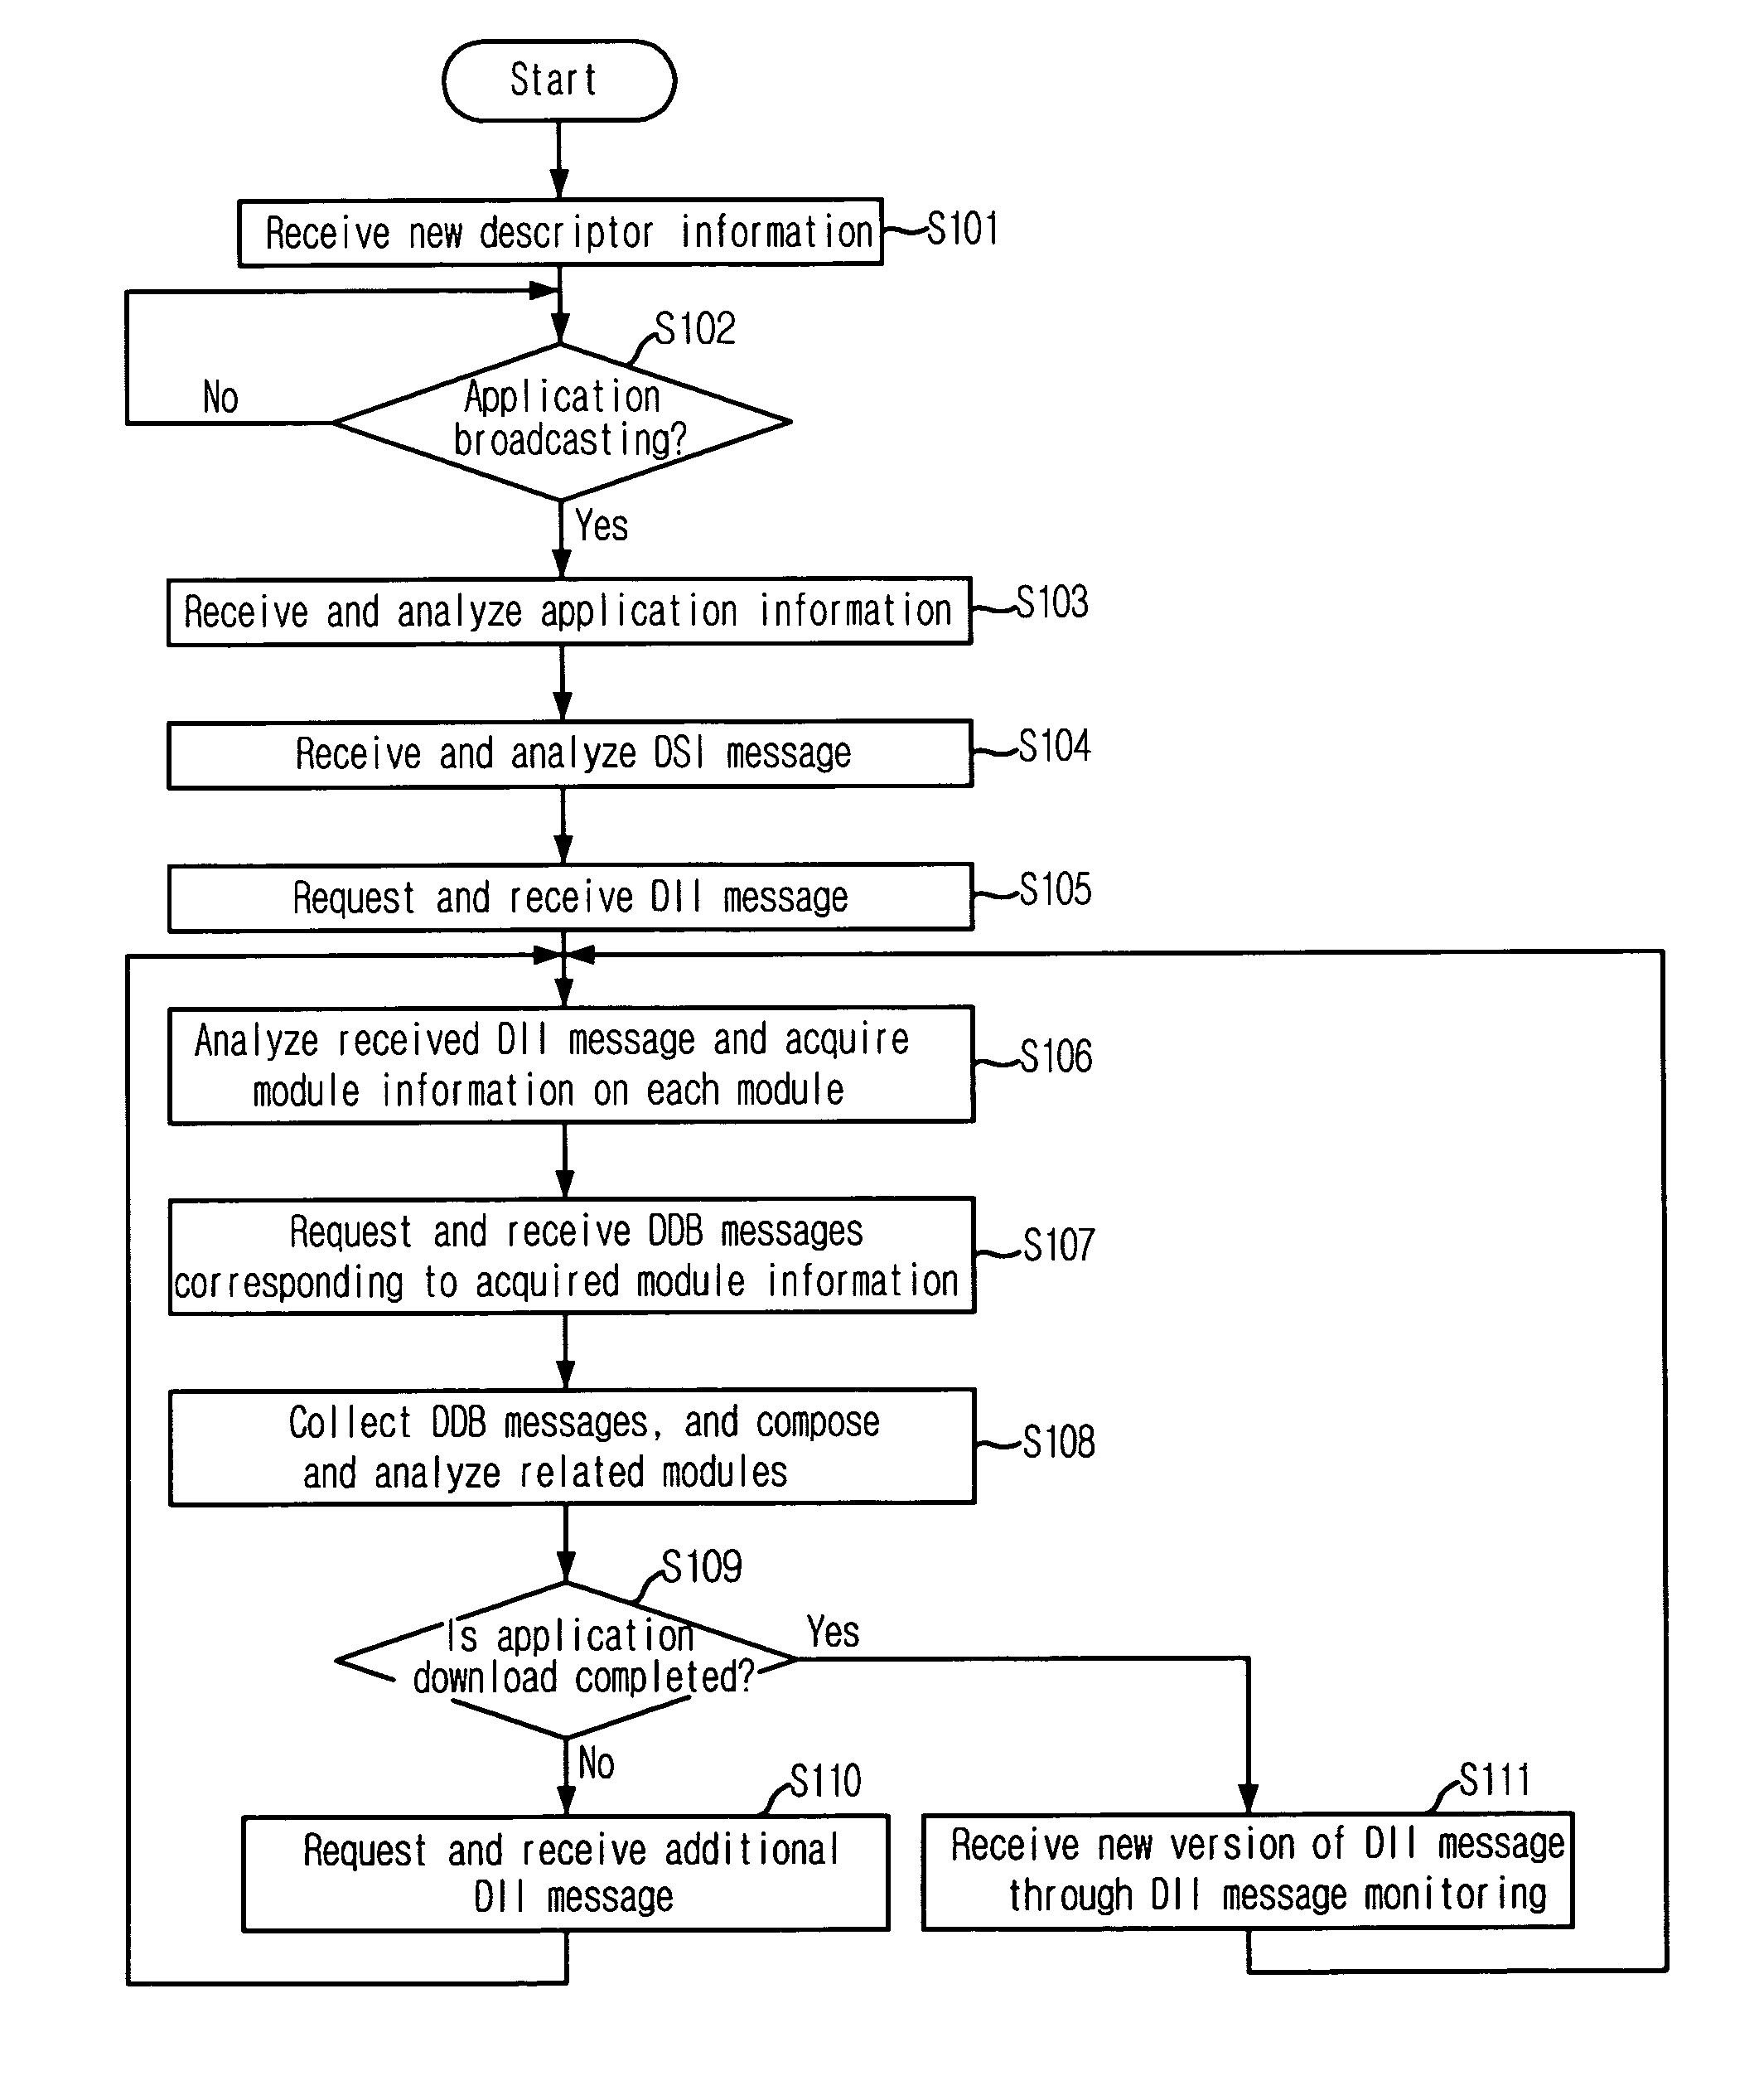 Parsing apparatus and method for shortening download time delay of data broadcasting application